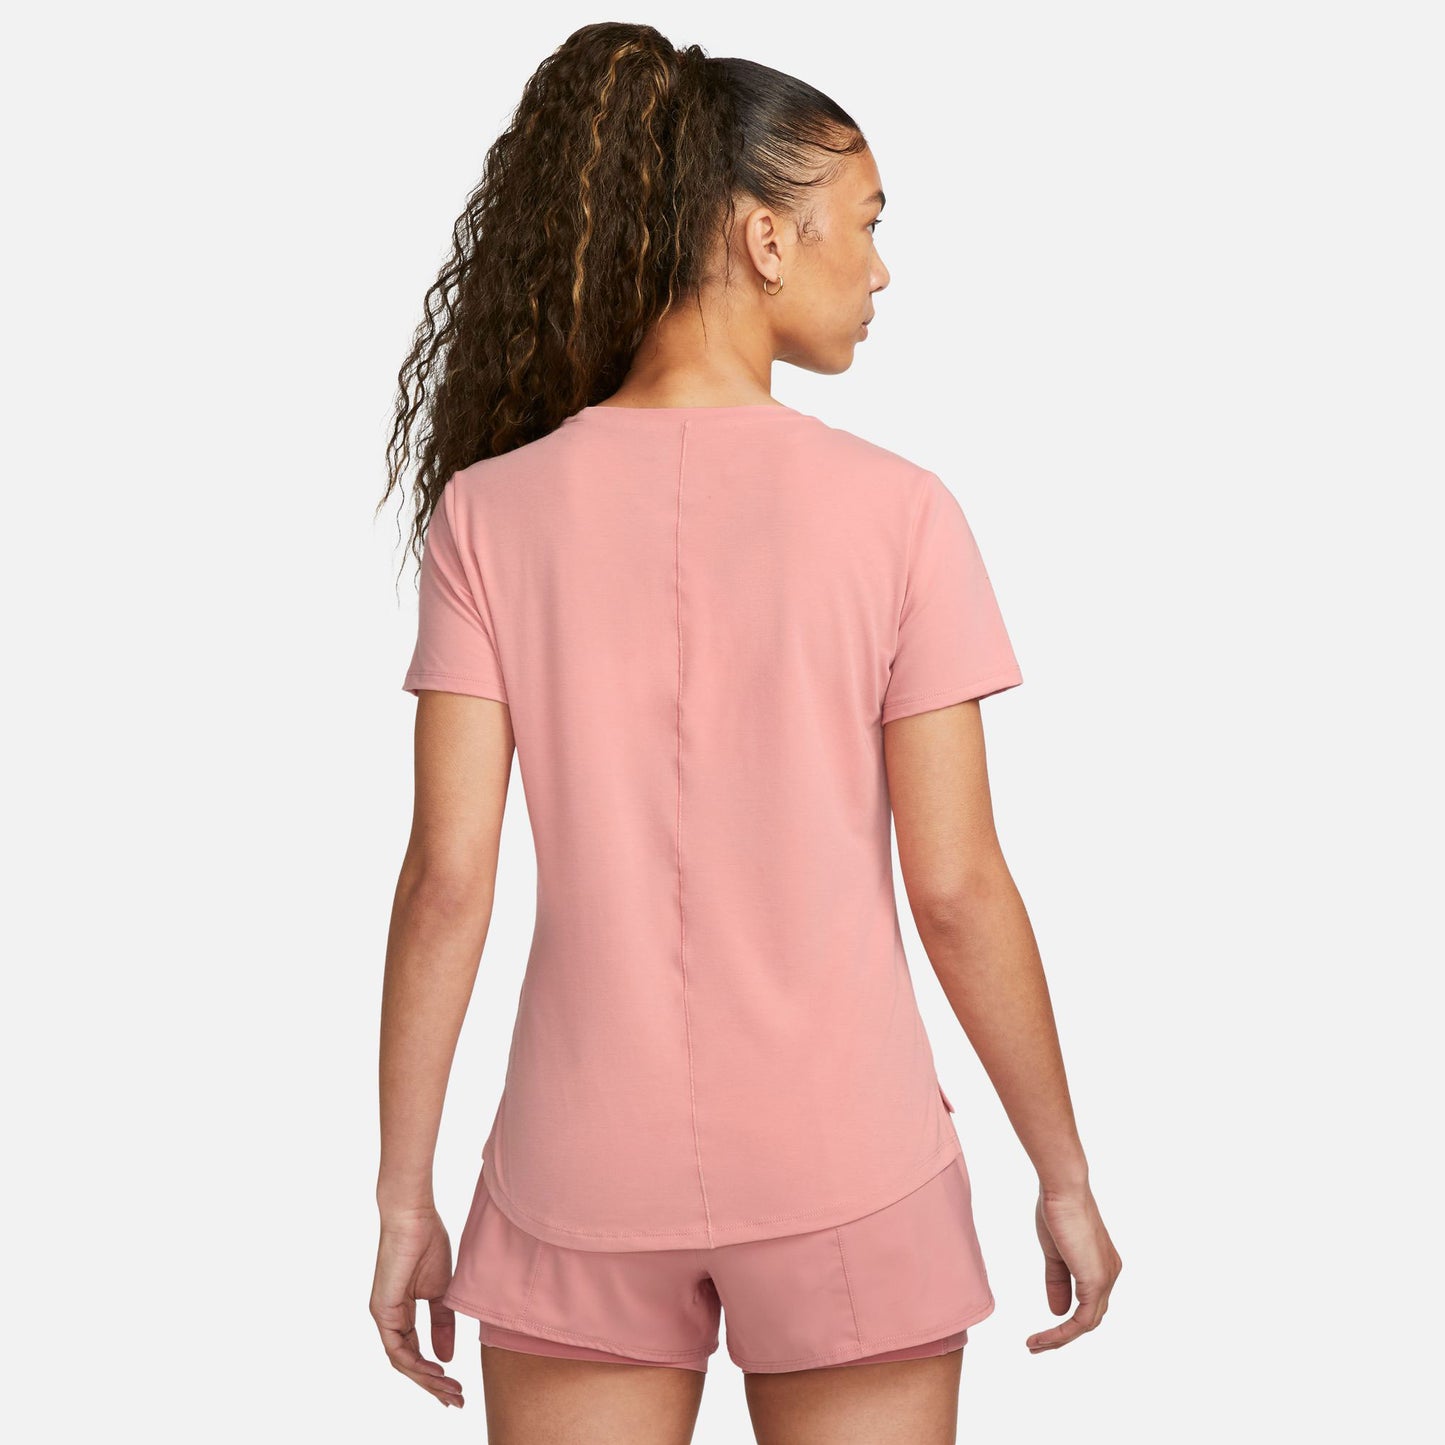 Nike One Luxe Dri-FIT Women's Standard Fit Shirt Pink (2)